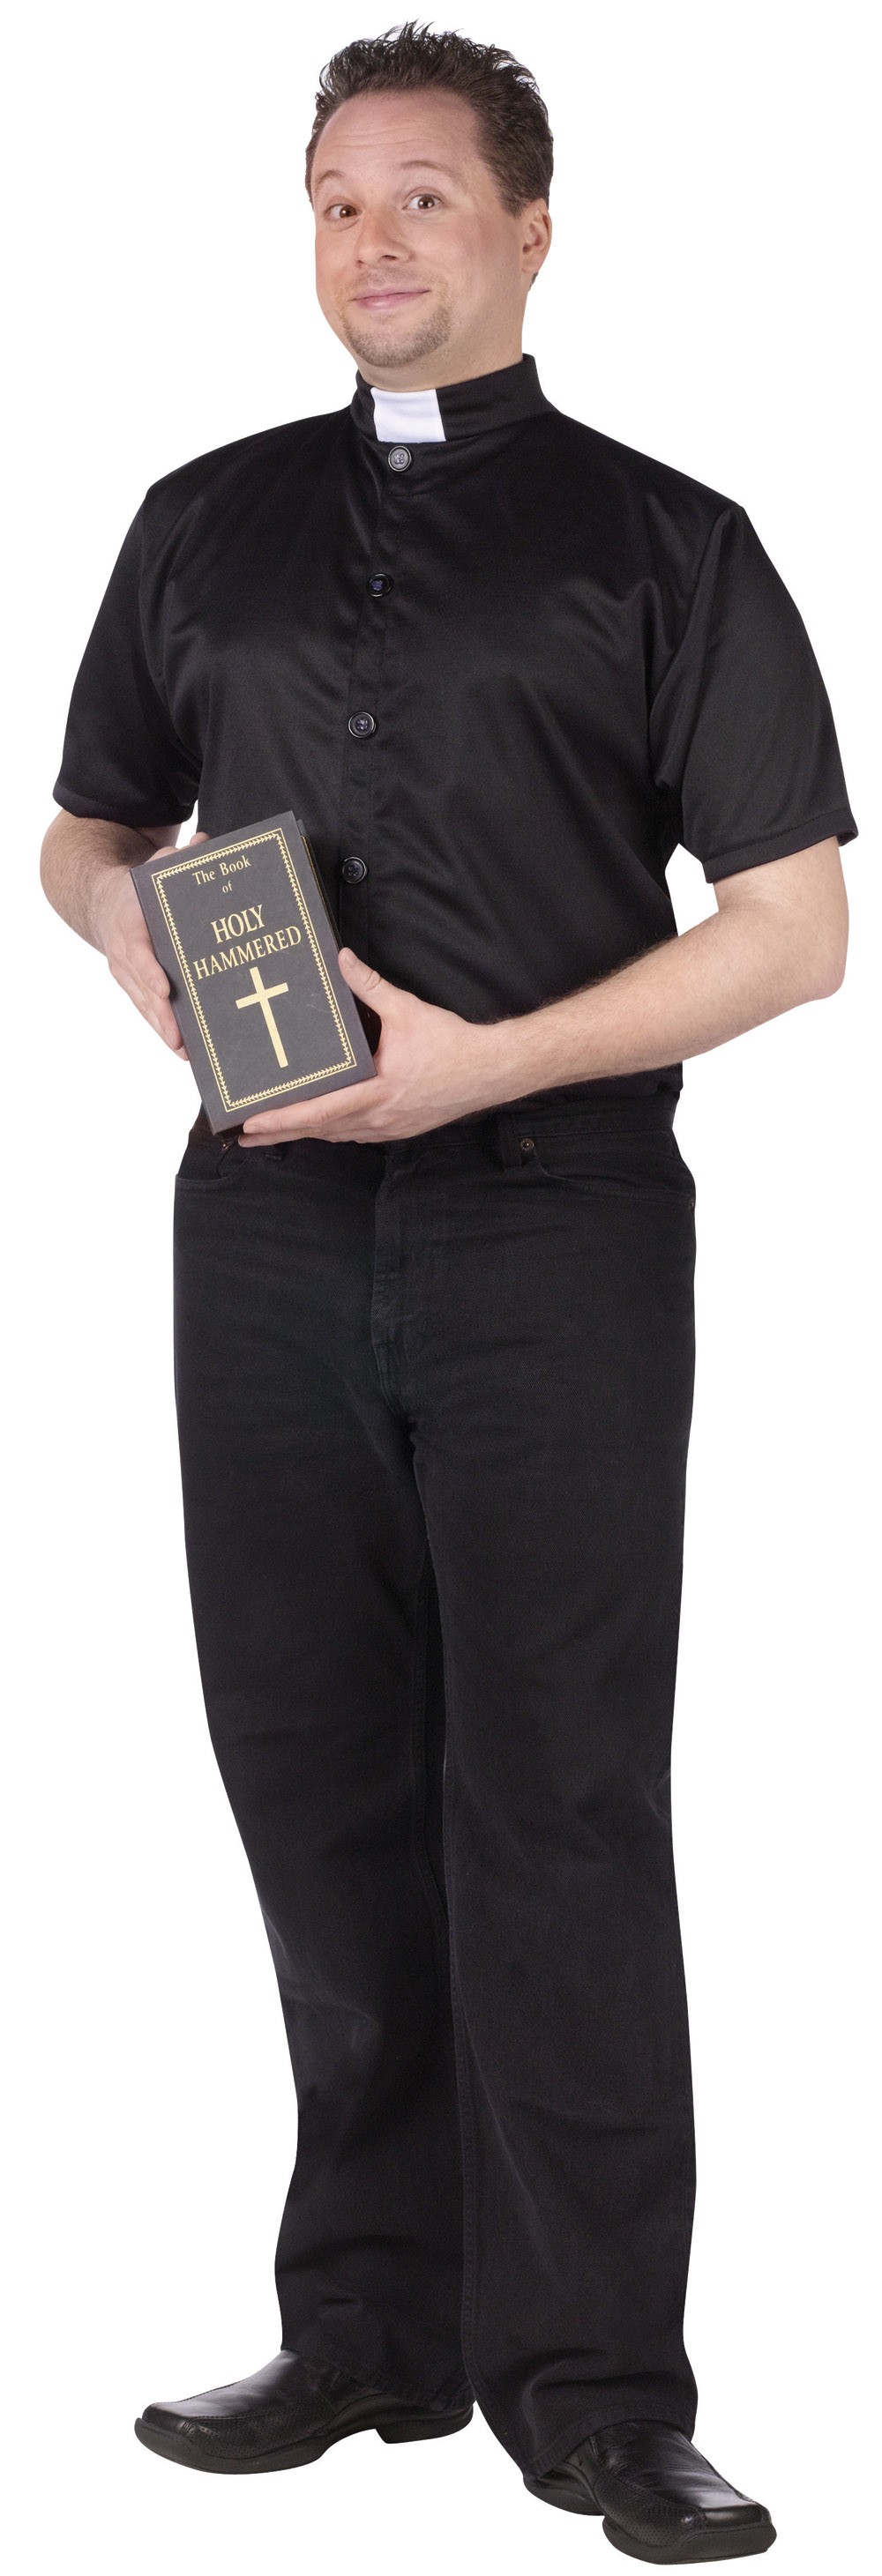 Holy Hammered : Alcoholic Priest Costume | Fun Beer Costume